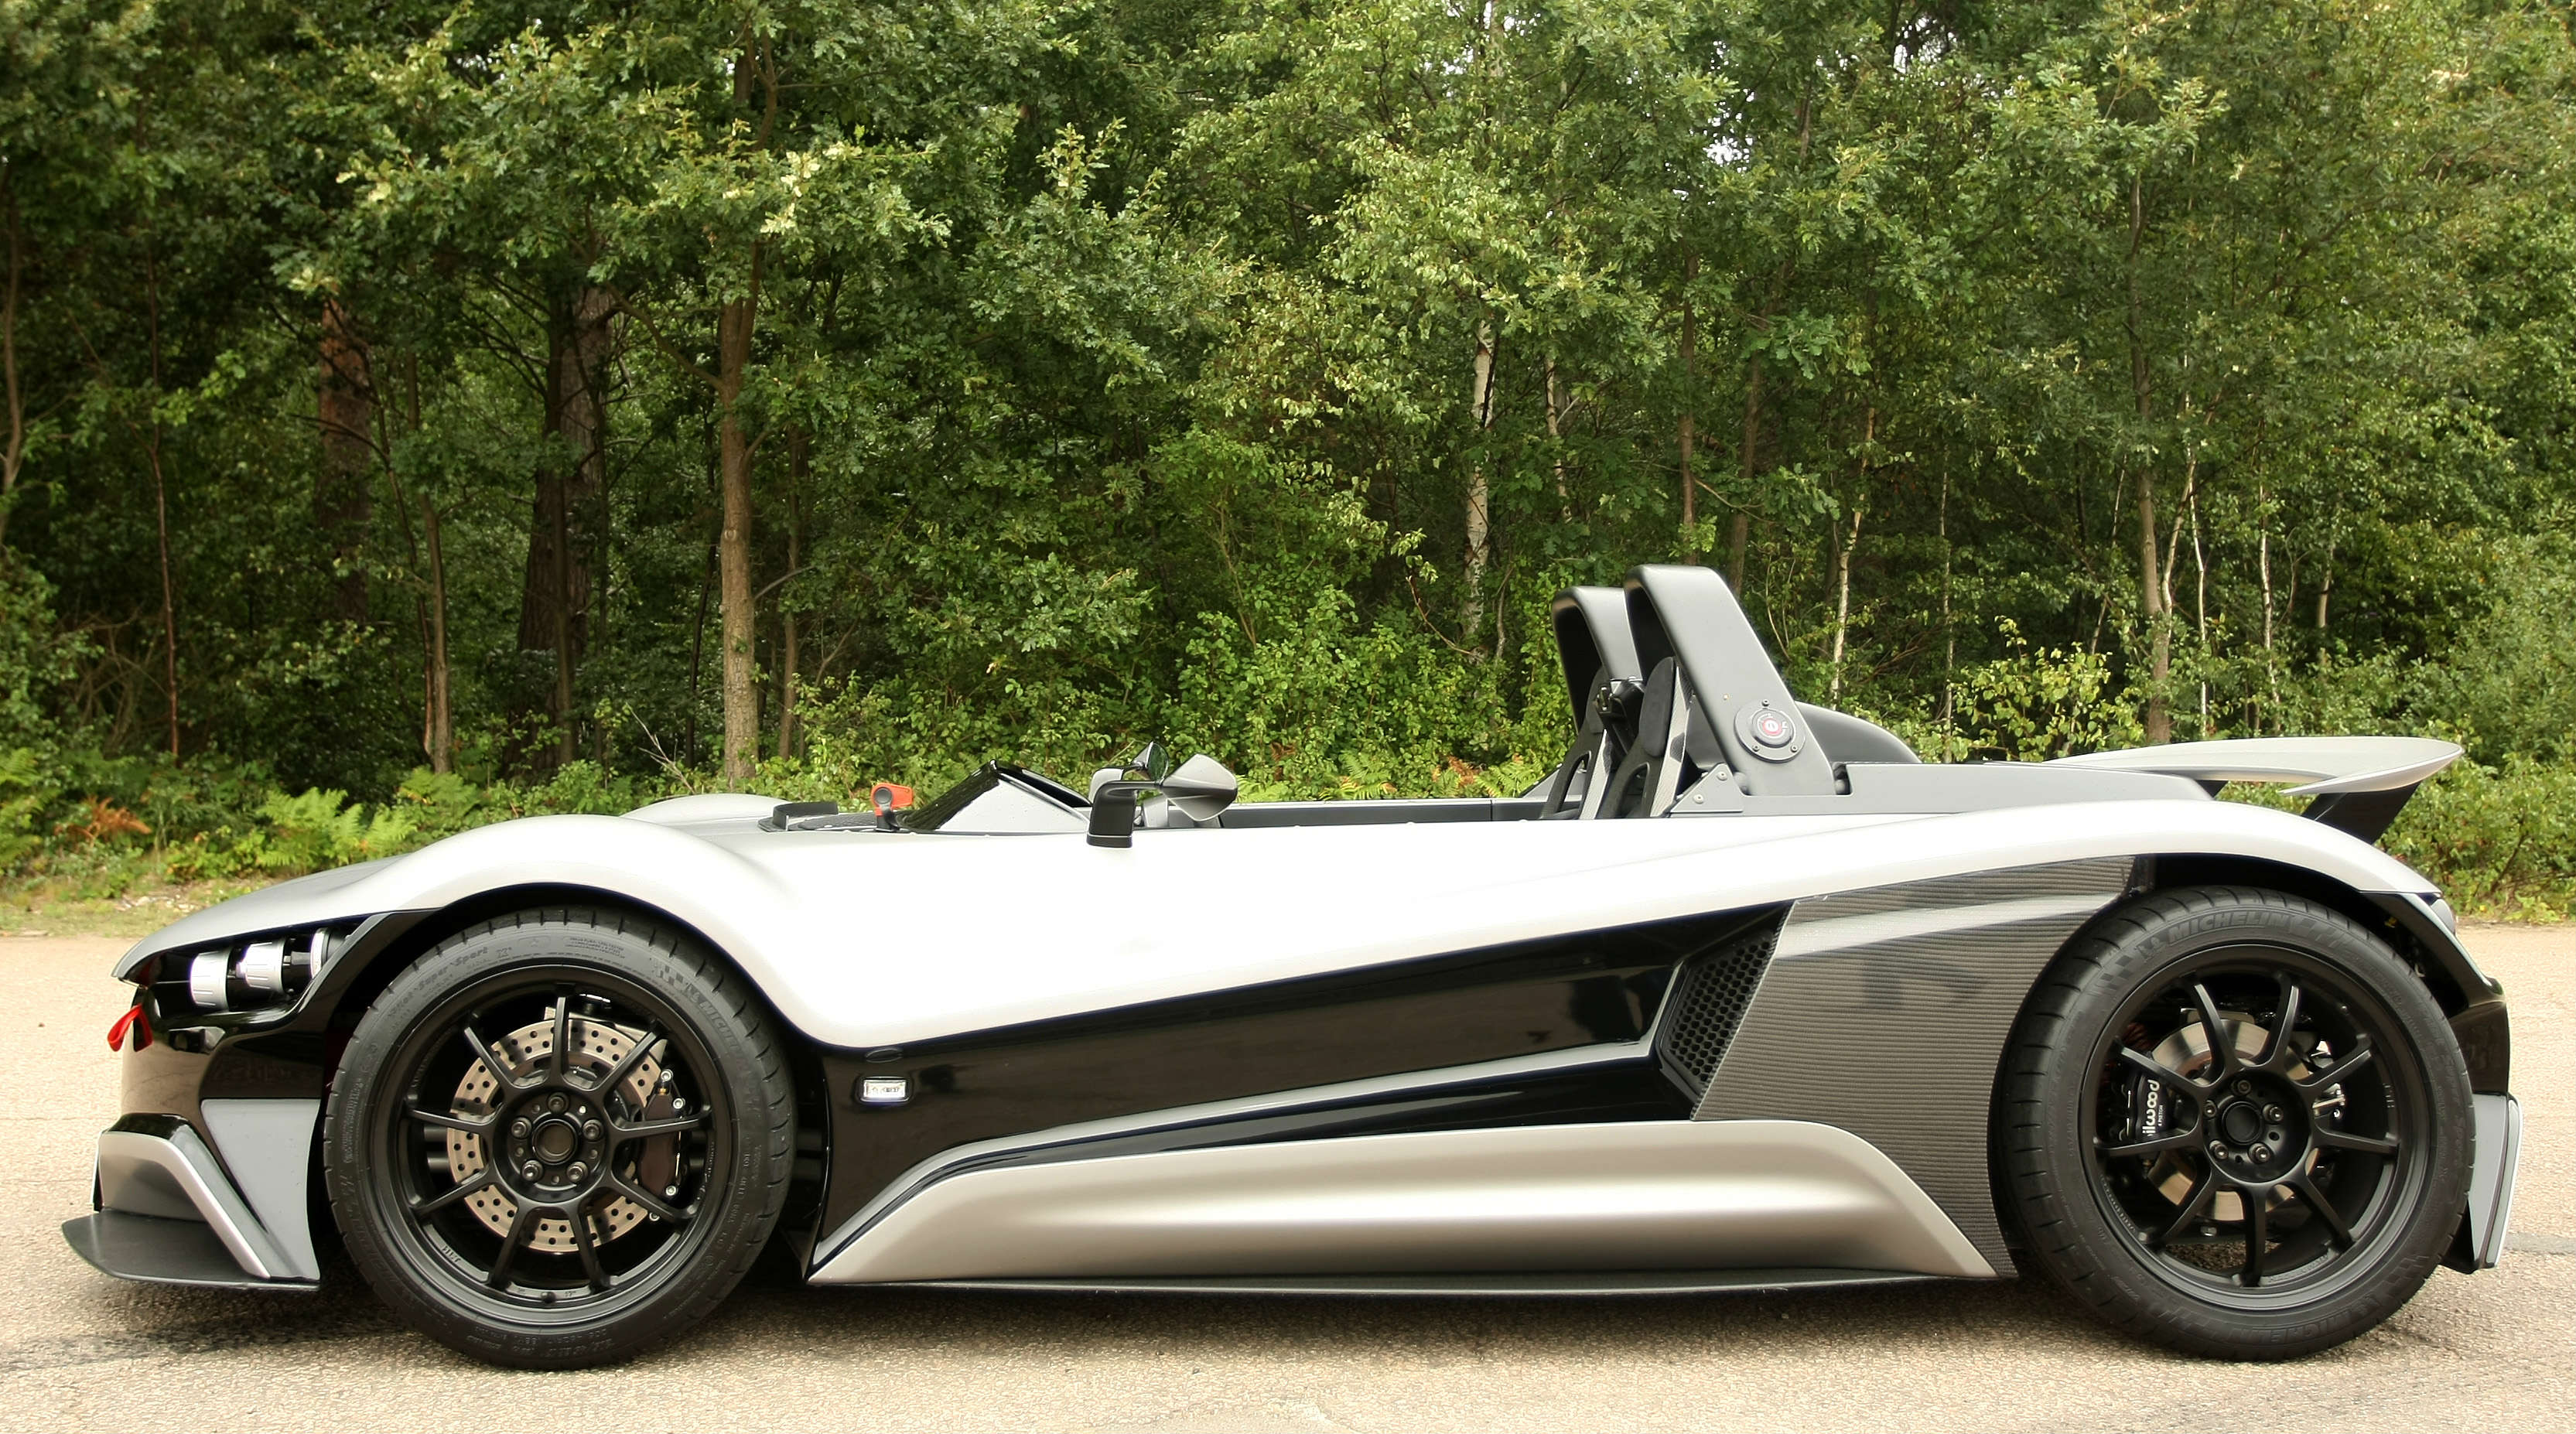 Review of the Vuhl 05 sports car, by James Mills of The Sunday TImes Driving